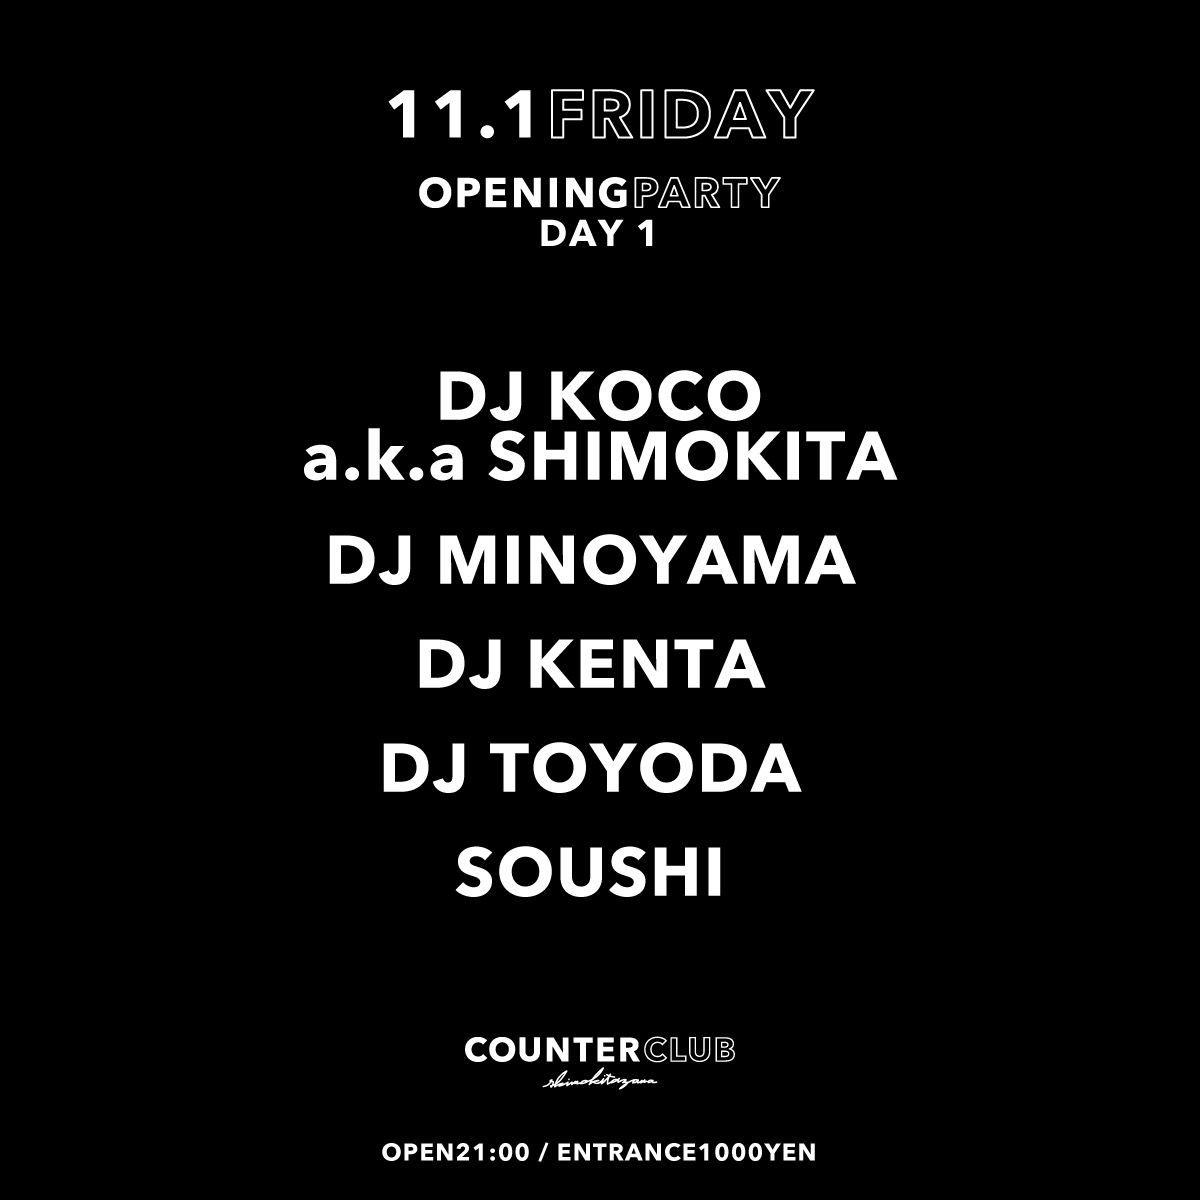 COUNTER CLUB OPENING PARTY ‘’DAY 1’’